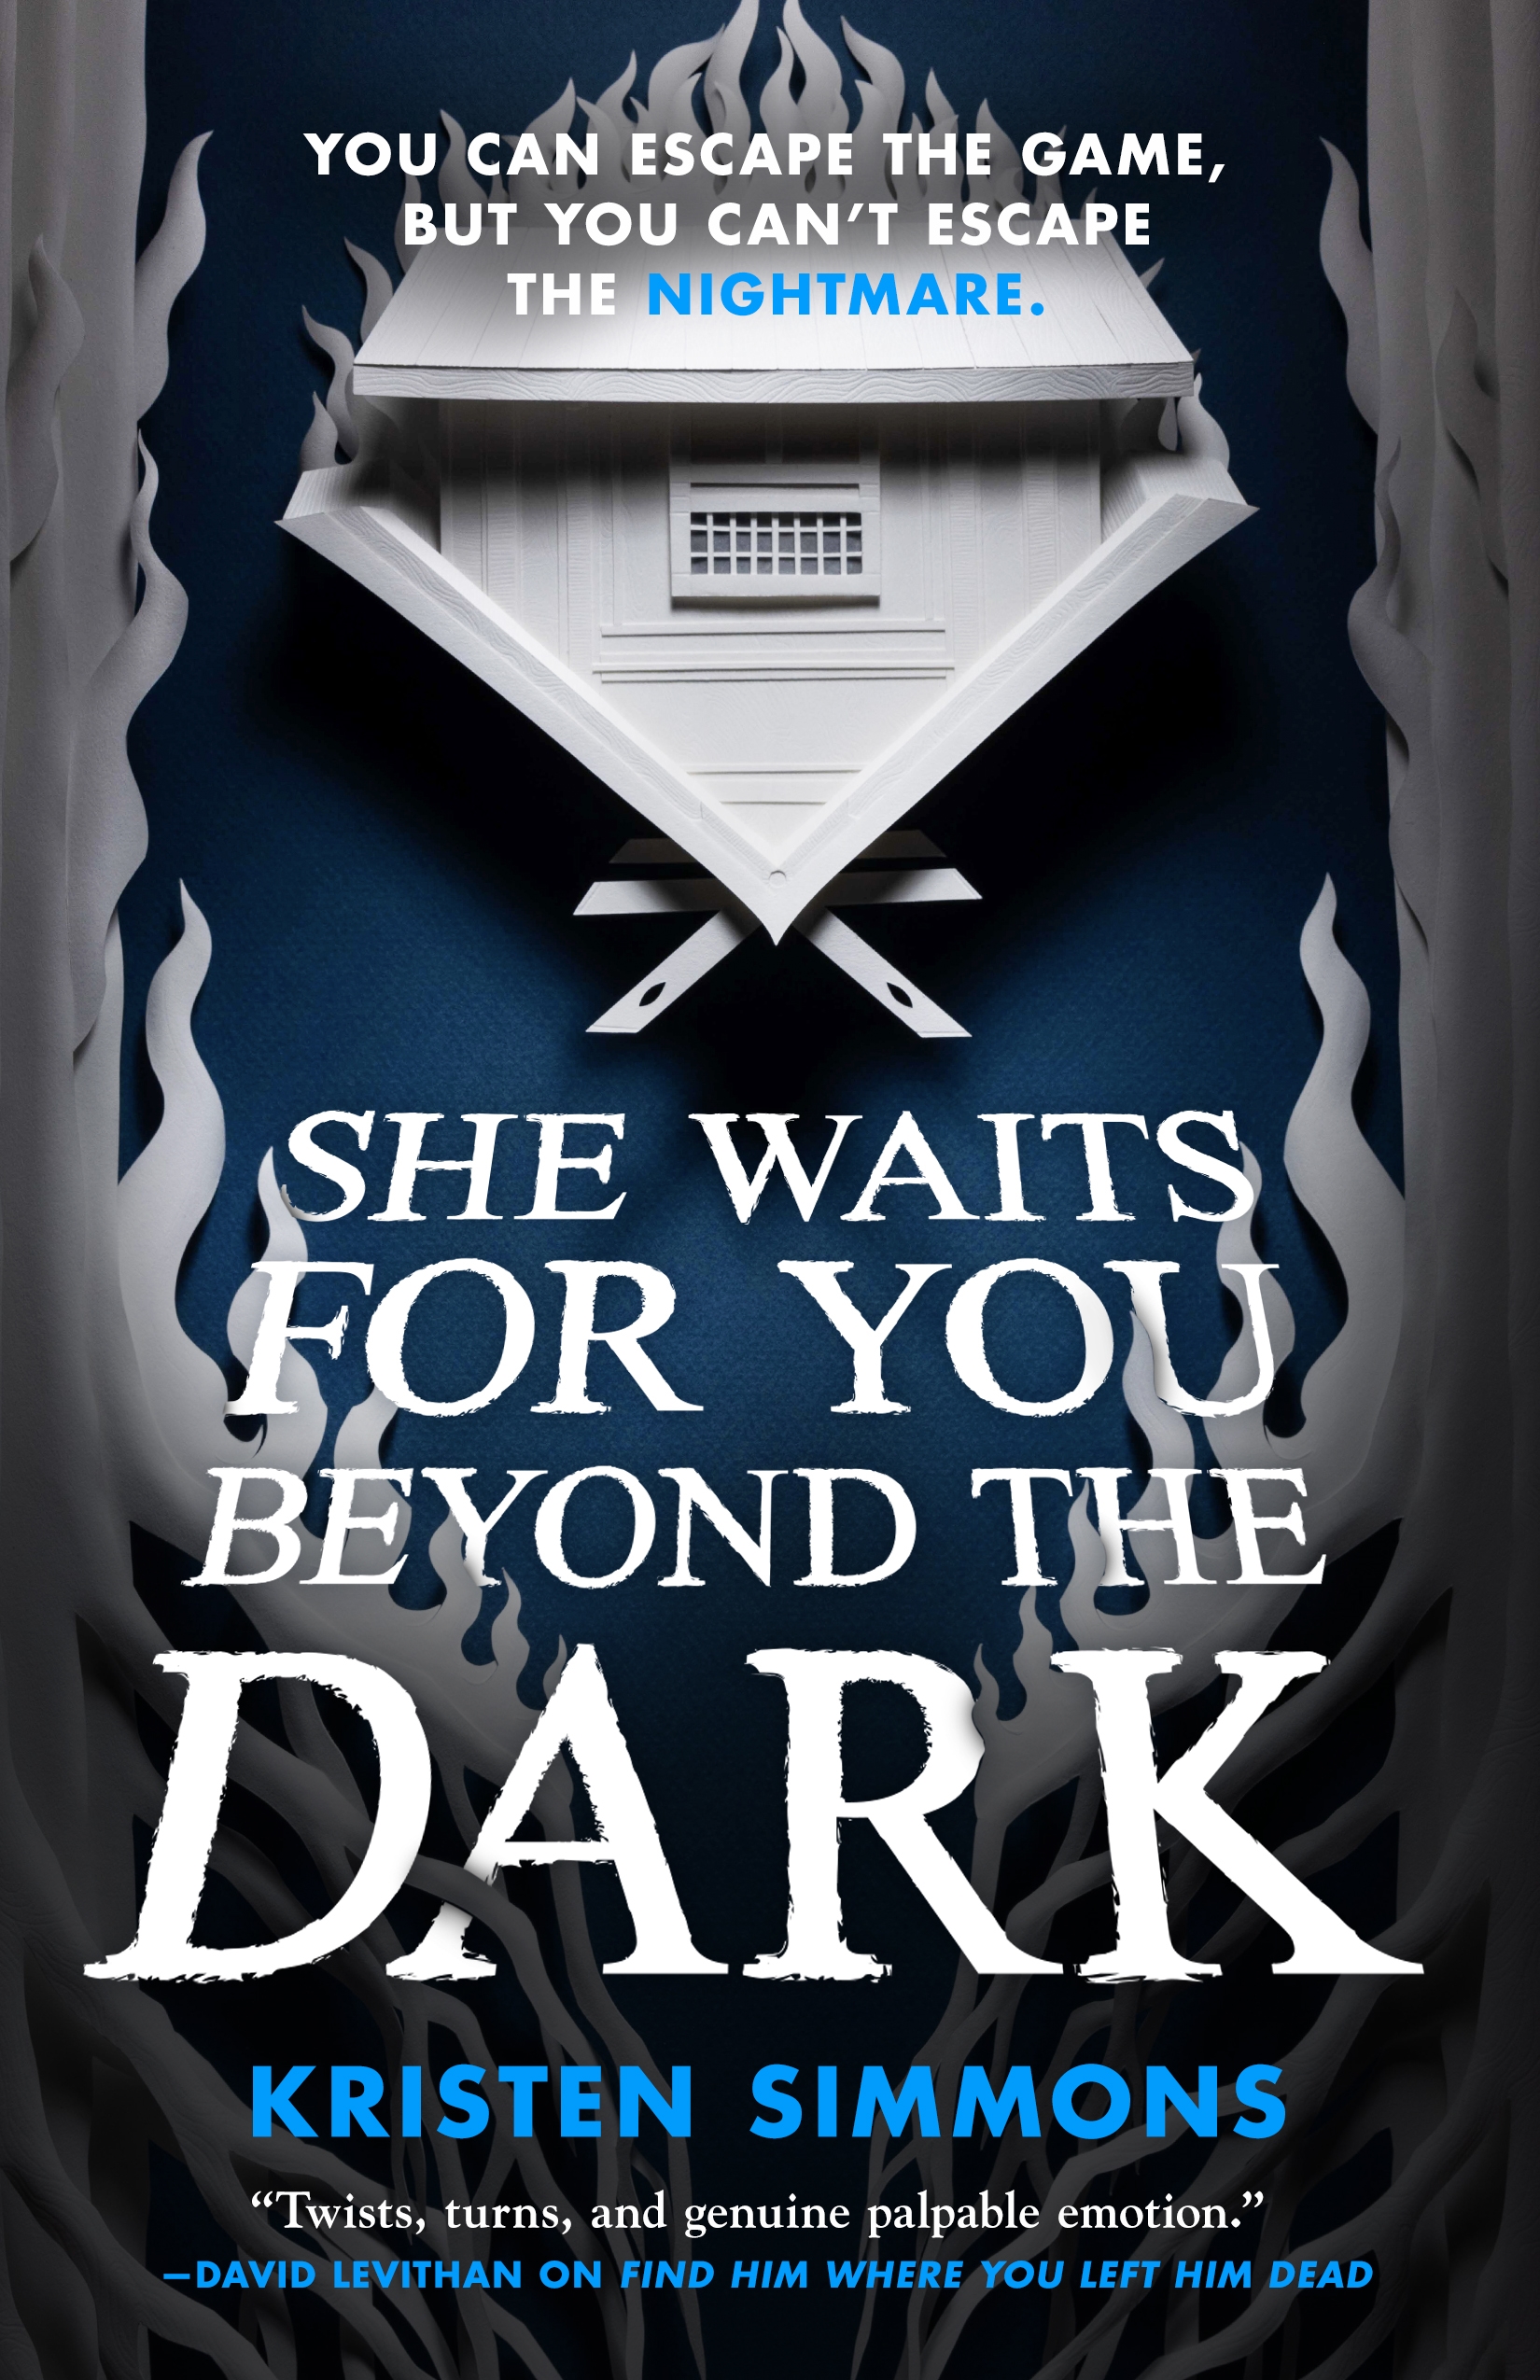 She Waits for You Beyond the Dark by Kristen Simmons